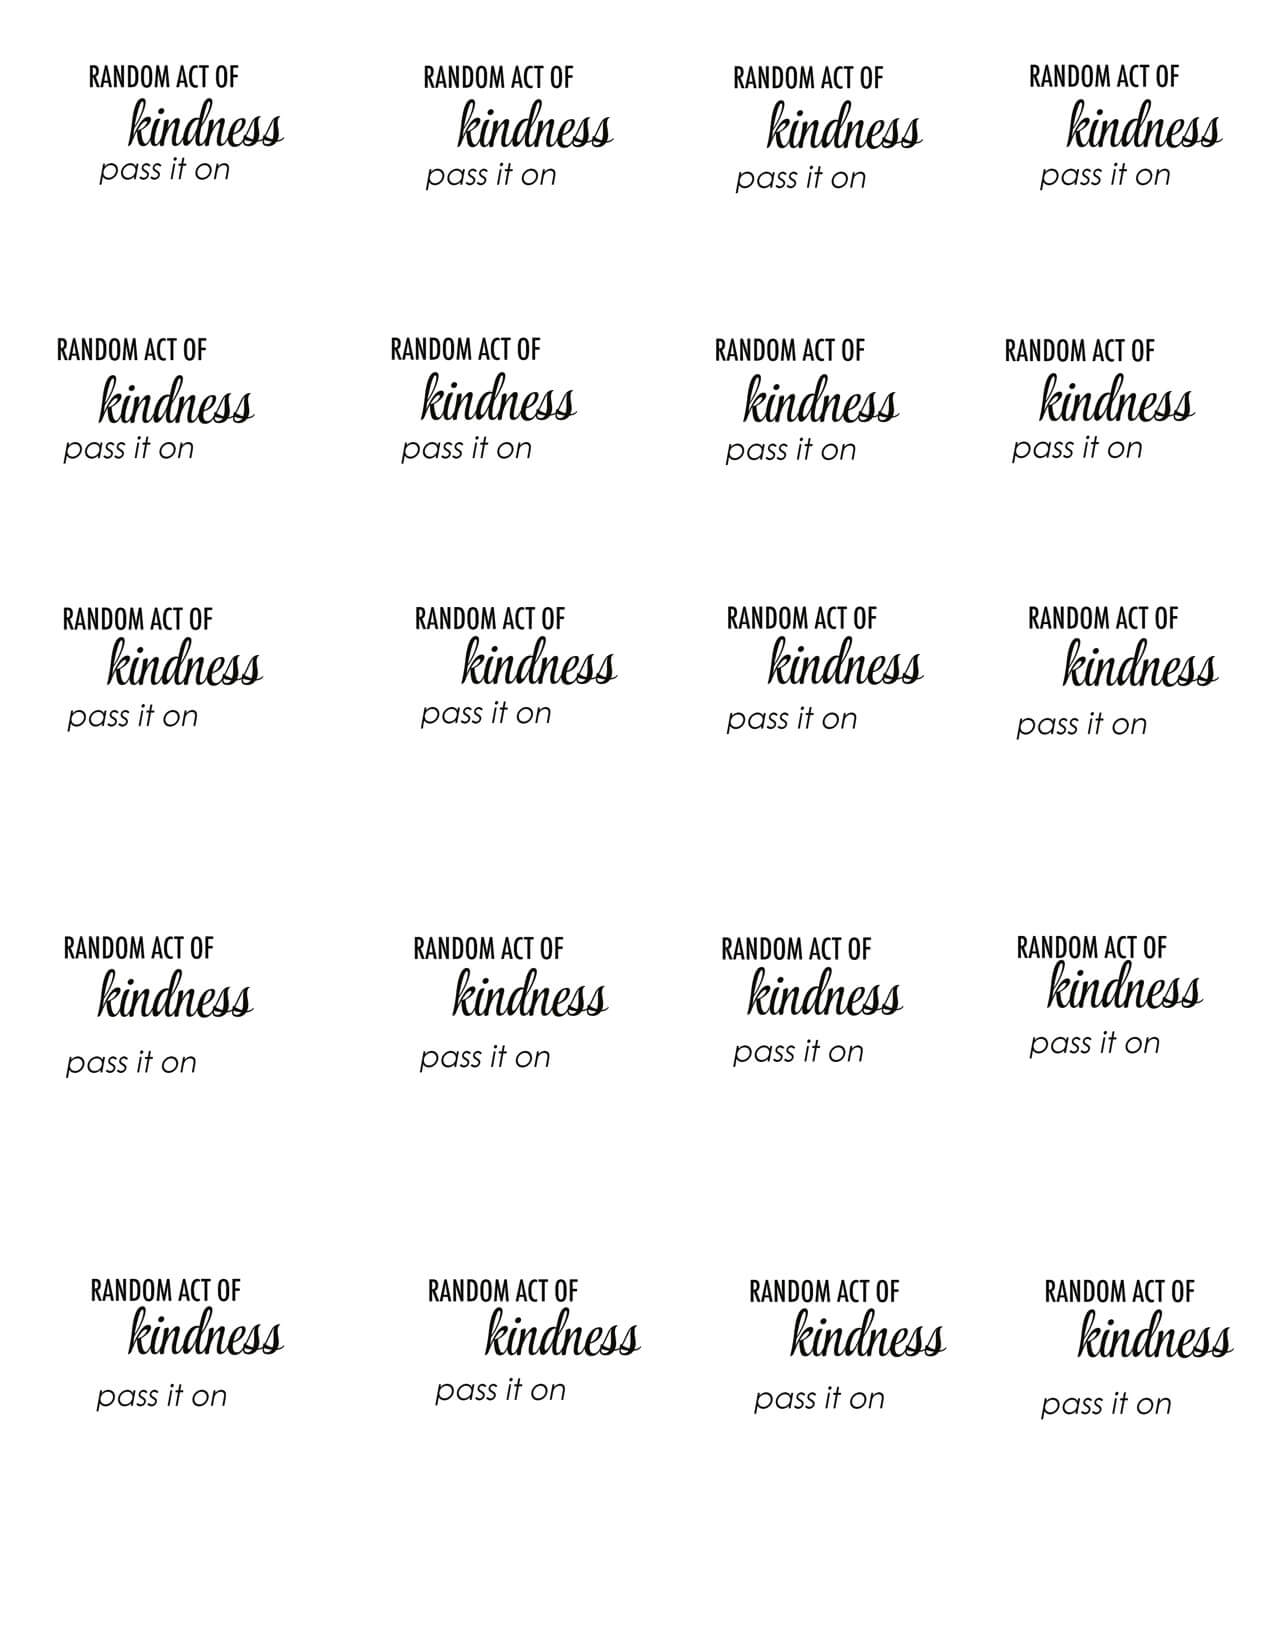 29 Images Of Acts Of Kindness Template | Unemeuf Intended For Random Acts Of Kindness Cards Templates